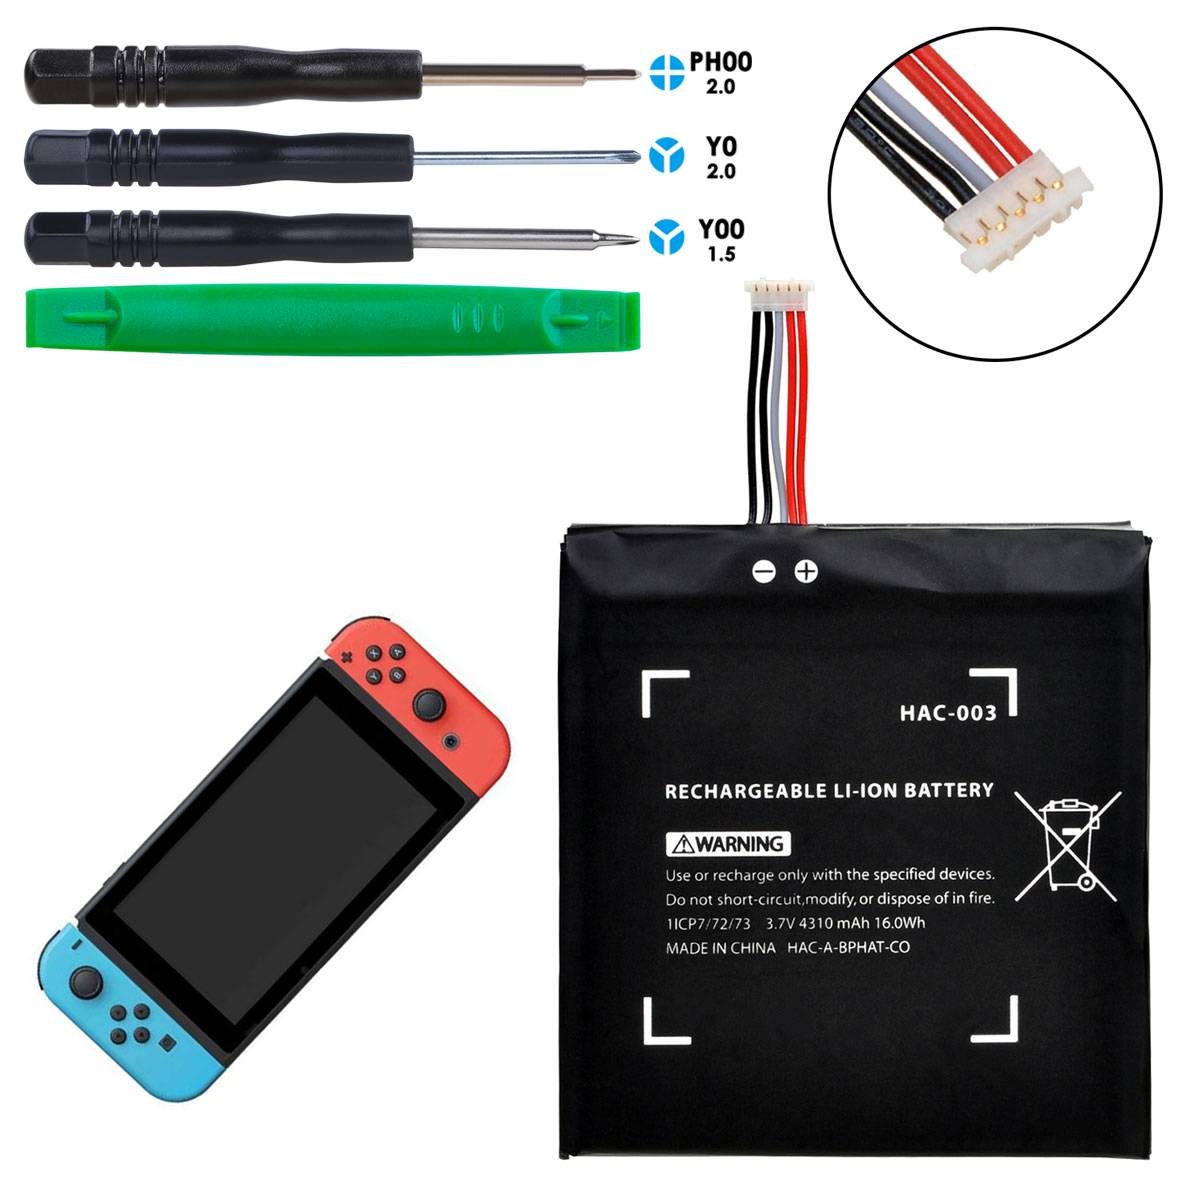 Switch Console Controller 3.7v 4310mah Rechargeable Li-ion Battery With Installation Tools Hac-003 Hac 003 Battery Lithium Ion